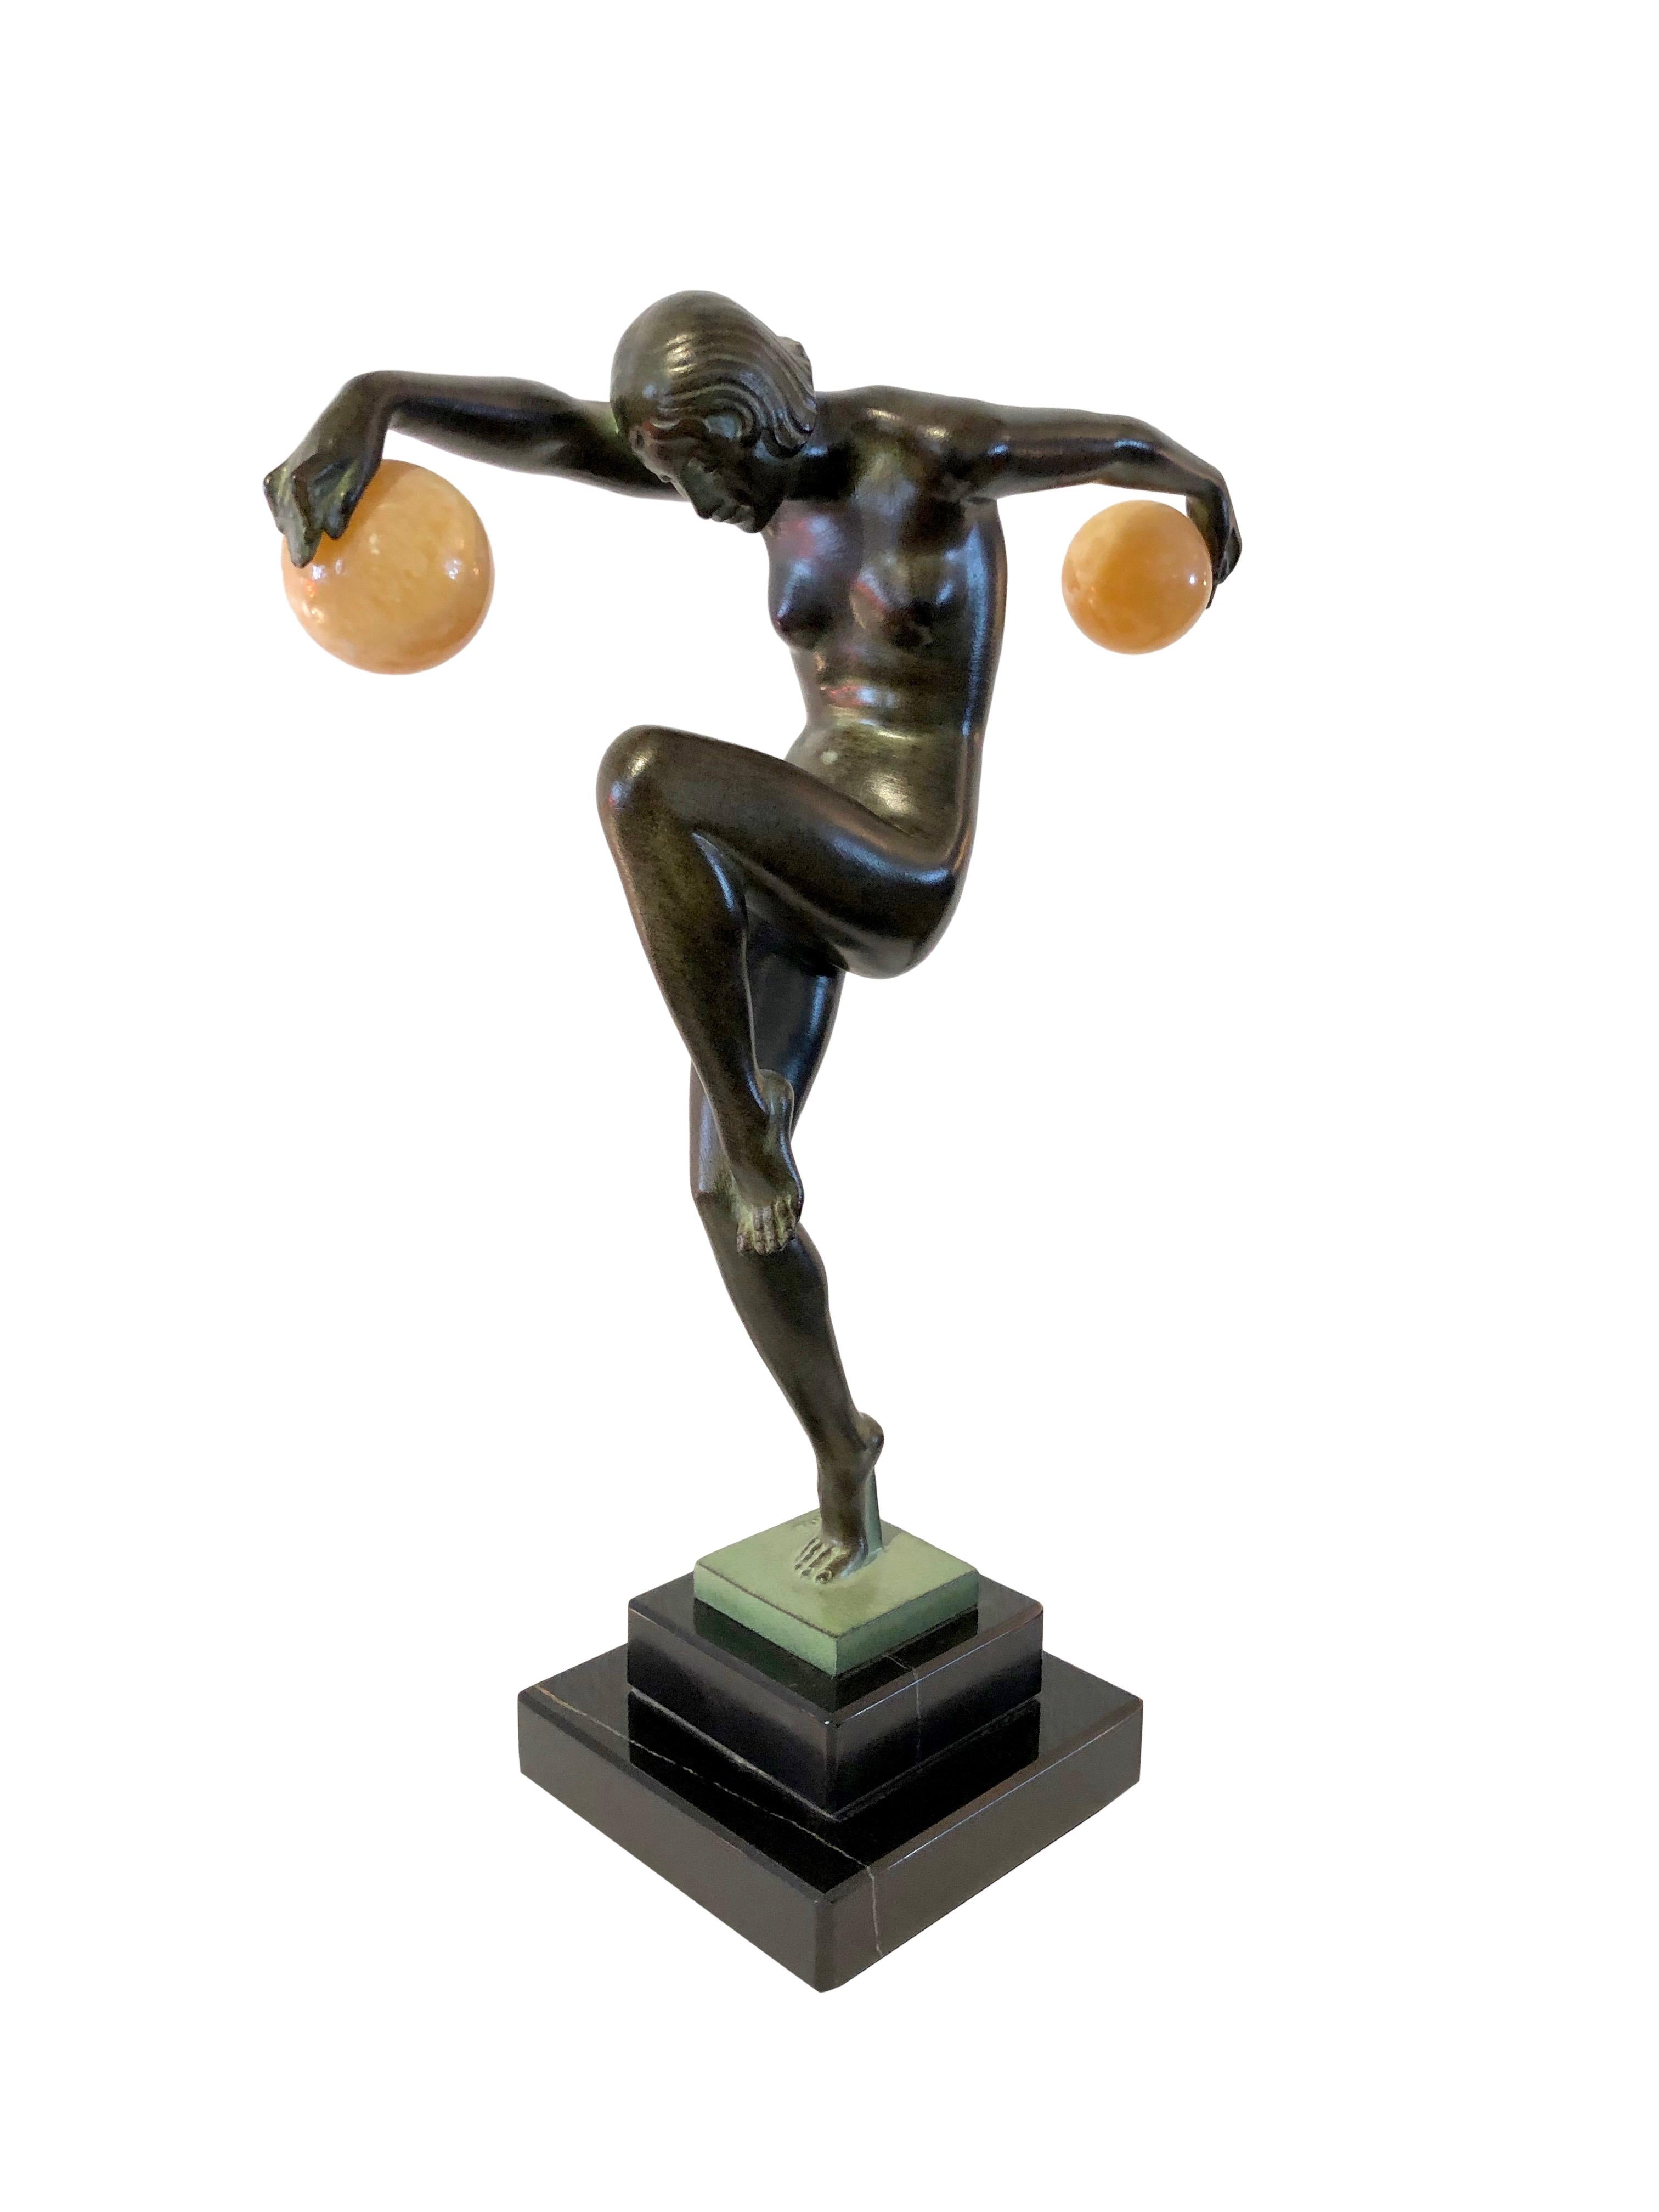 Sculpture dancing lady 
Danseuse Aux Boules, Ball dancer 
Designed in France during the roaring 1920s by “Denis”
Original Max Le Verrier, signed 
Art Deco style, France

Material: 
Régule (Spelter) 
Socle in black marble and balls in yellow